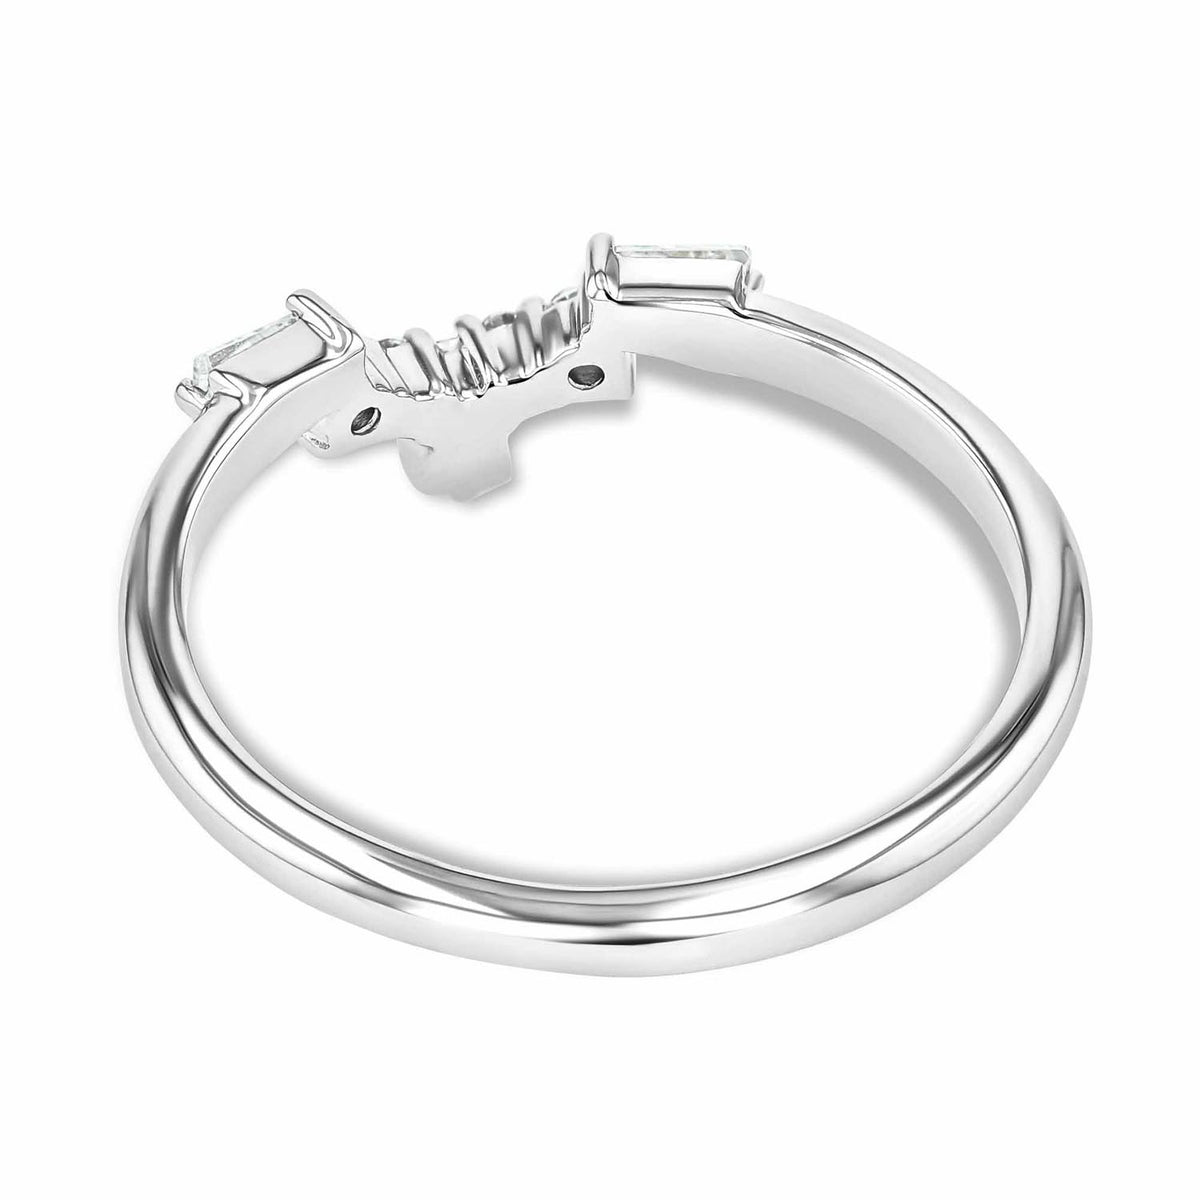 Sunset Accented Wedding Band Shown in 14K White Gold